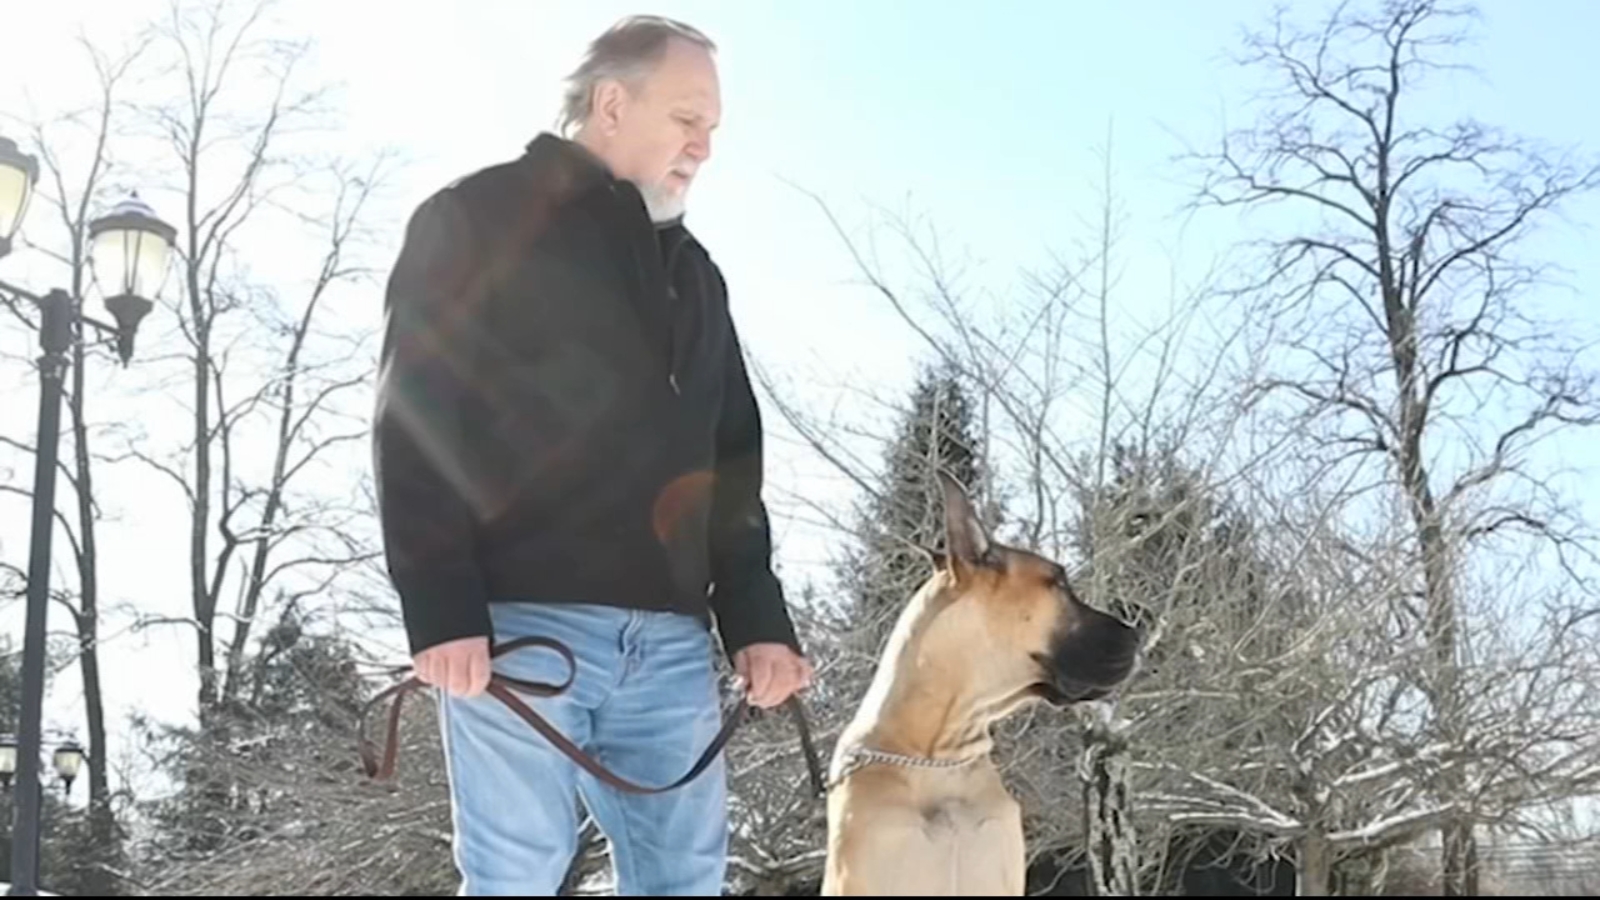 Columbus, New Jersey man rescued from trauma by dogs now pays it forward [Video]